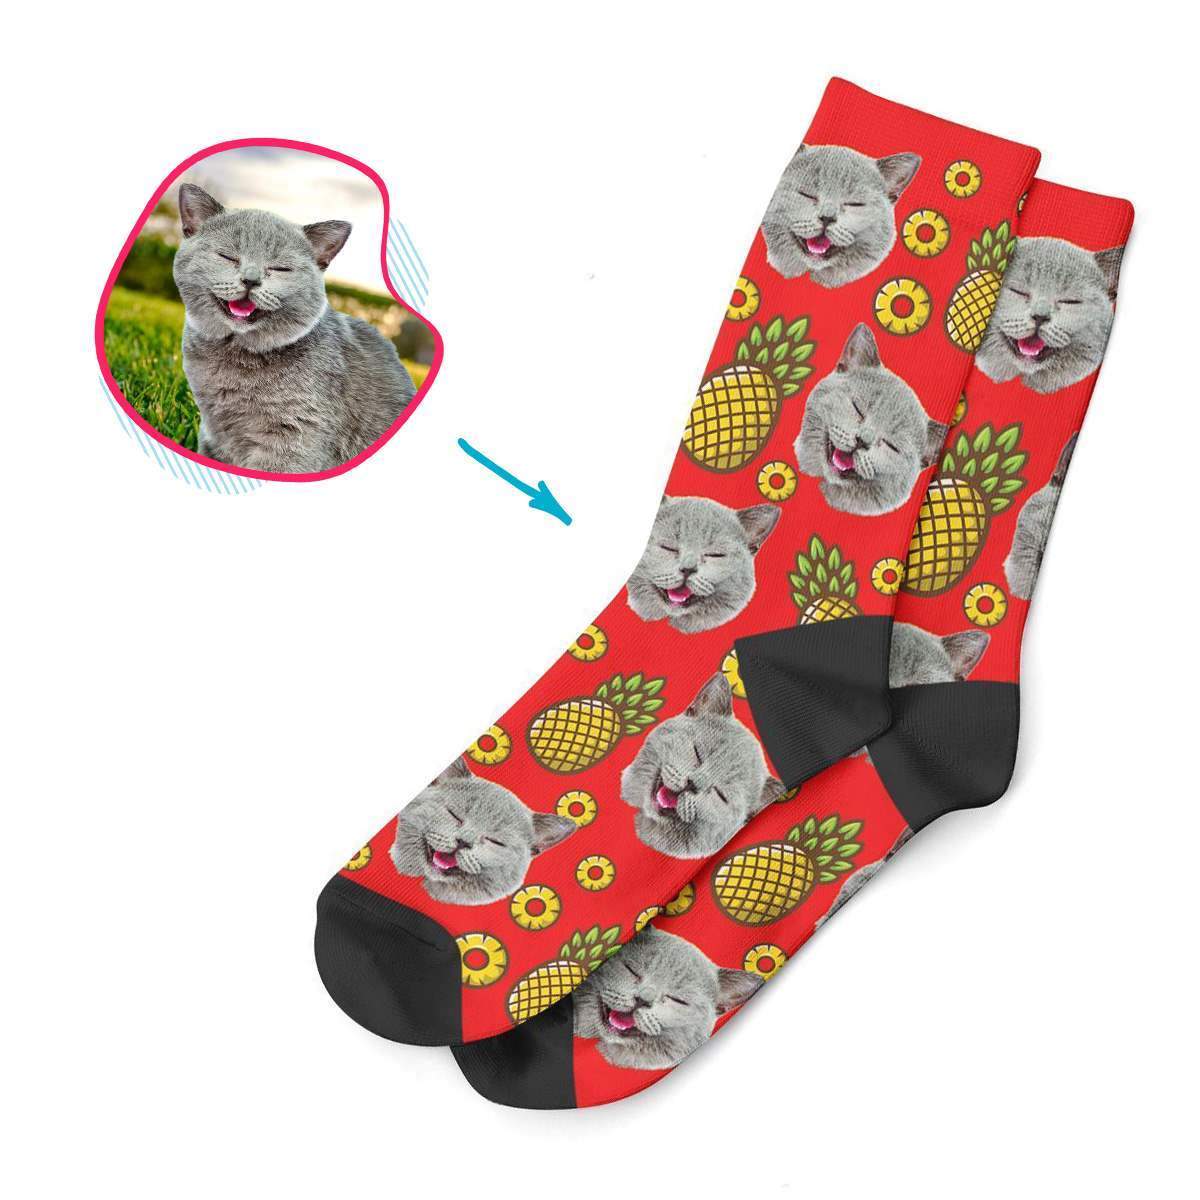 red Fruits socks personalized with photo of face printed on them